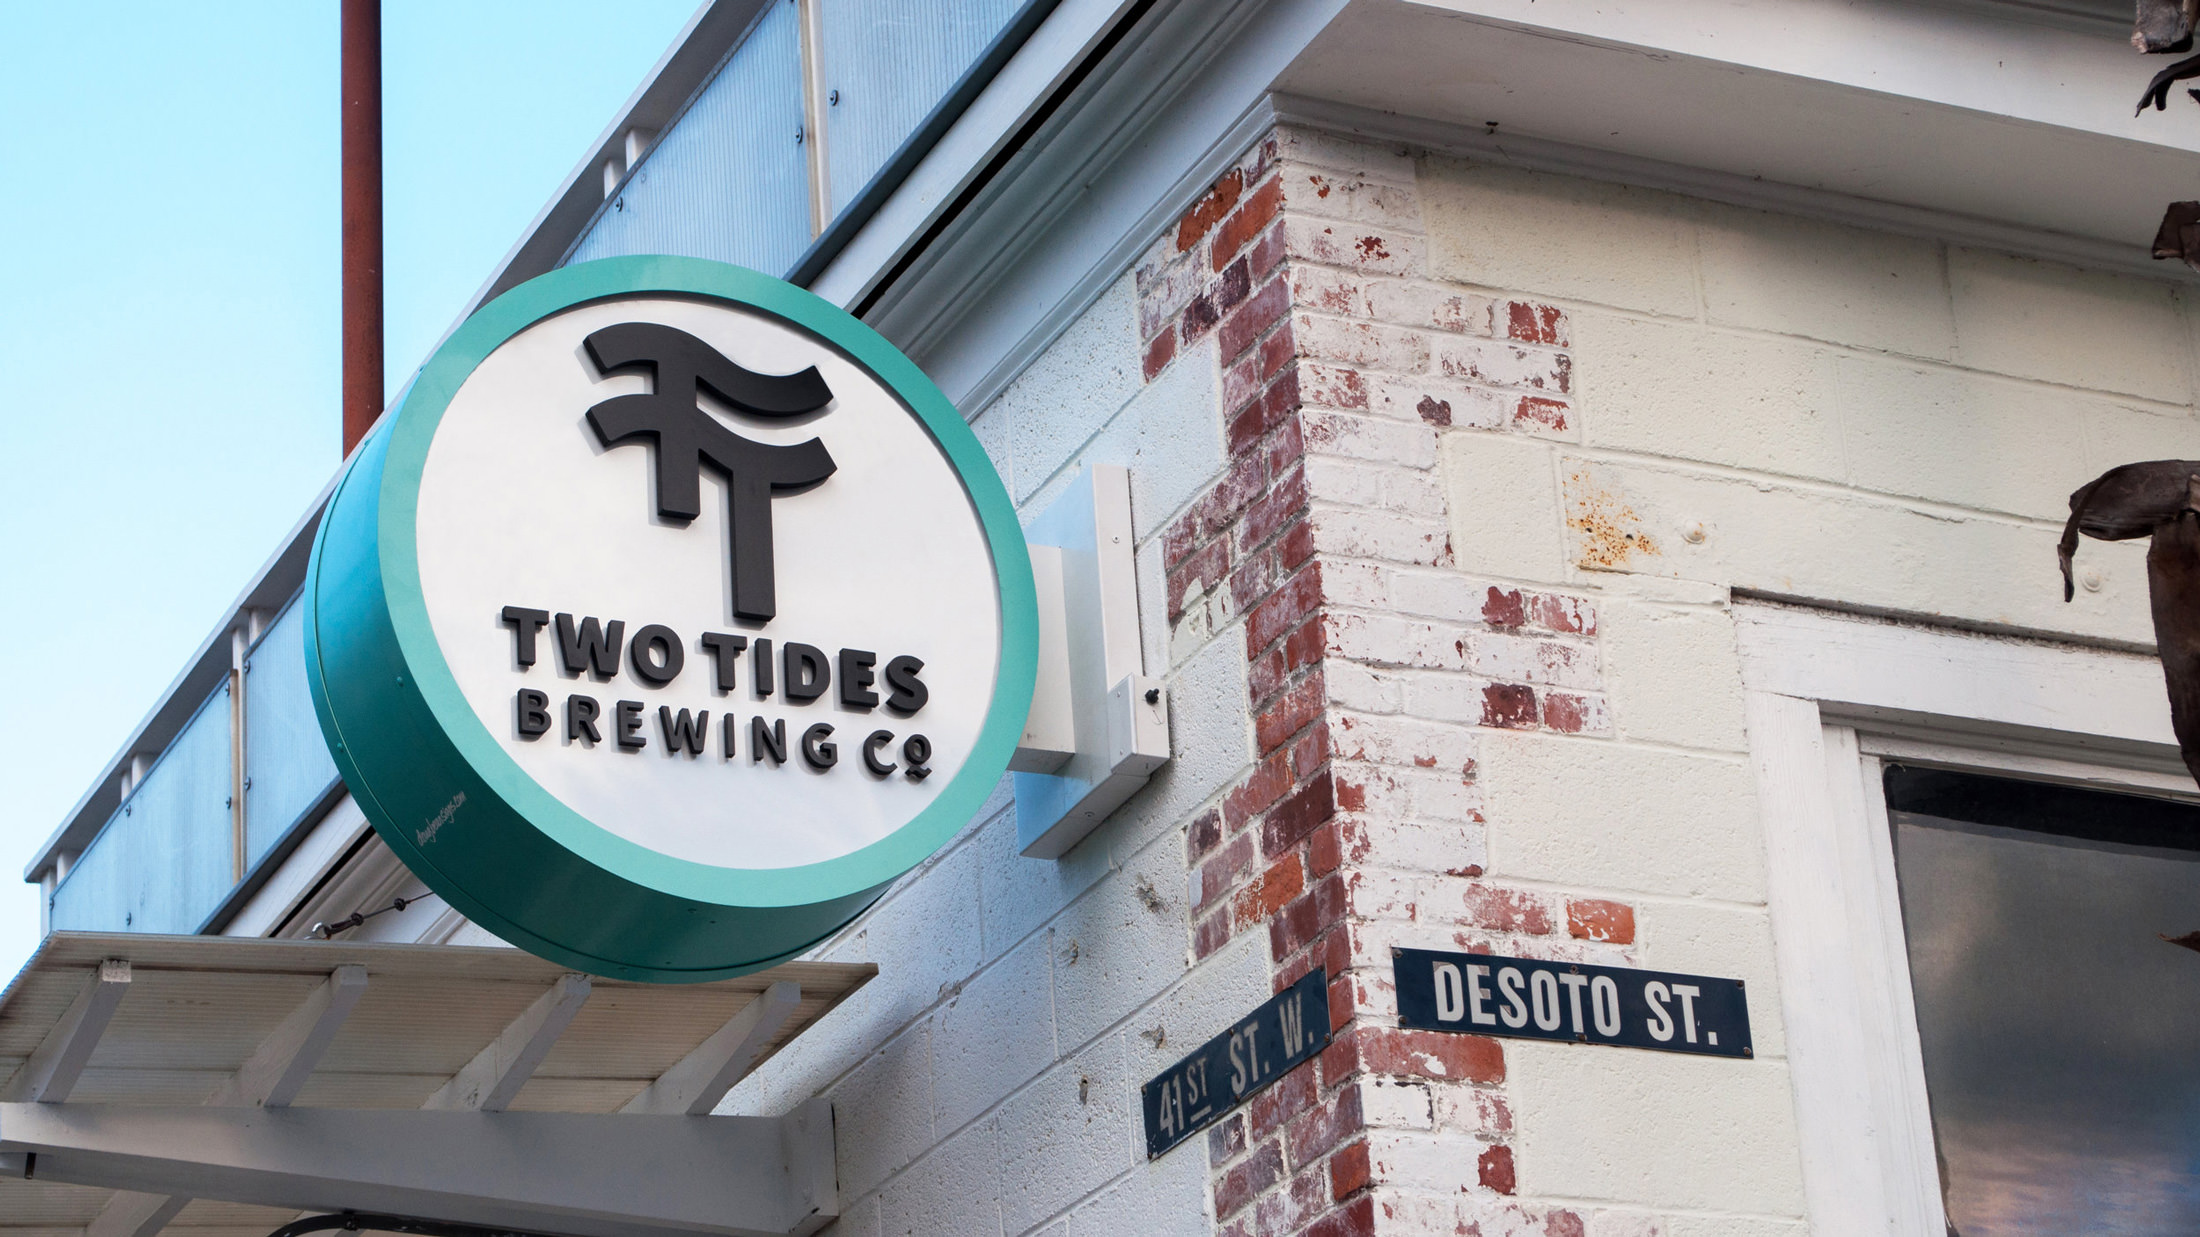 Poster image showing the exterior sign for Two Tides Brewing Co.